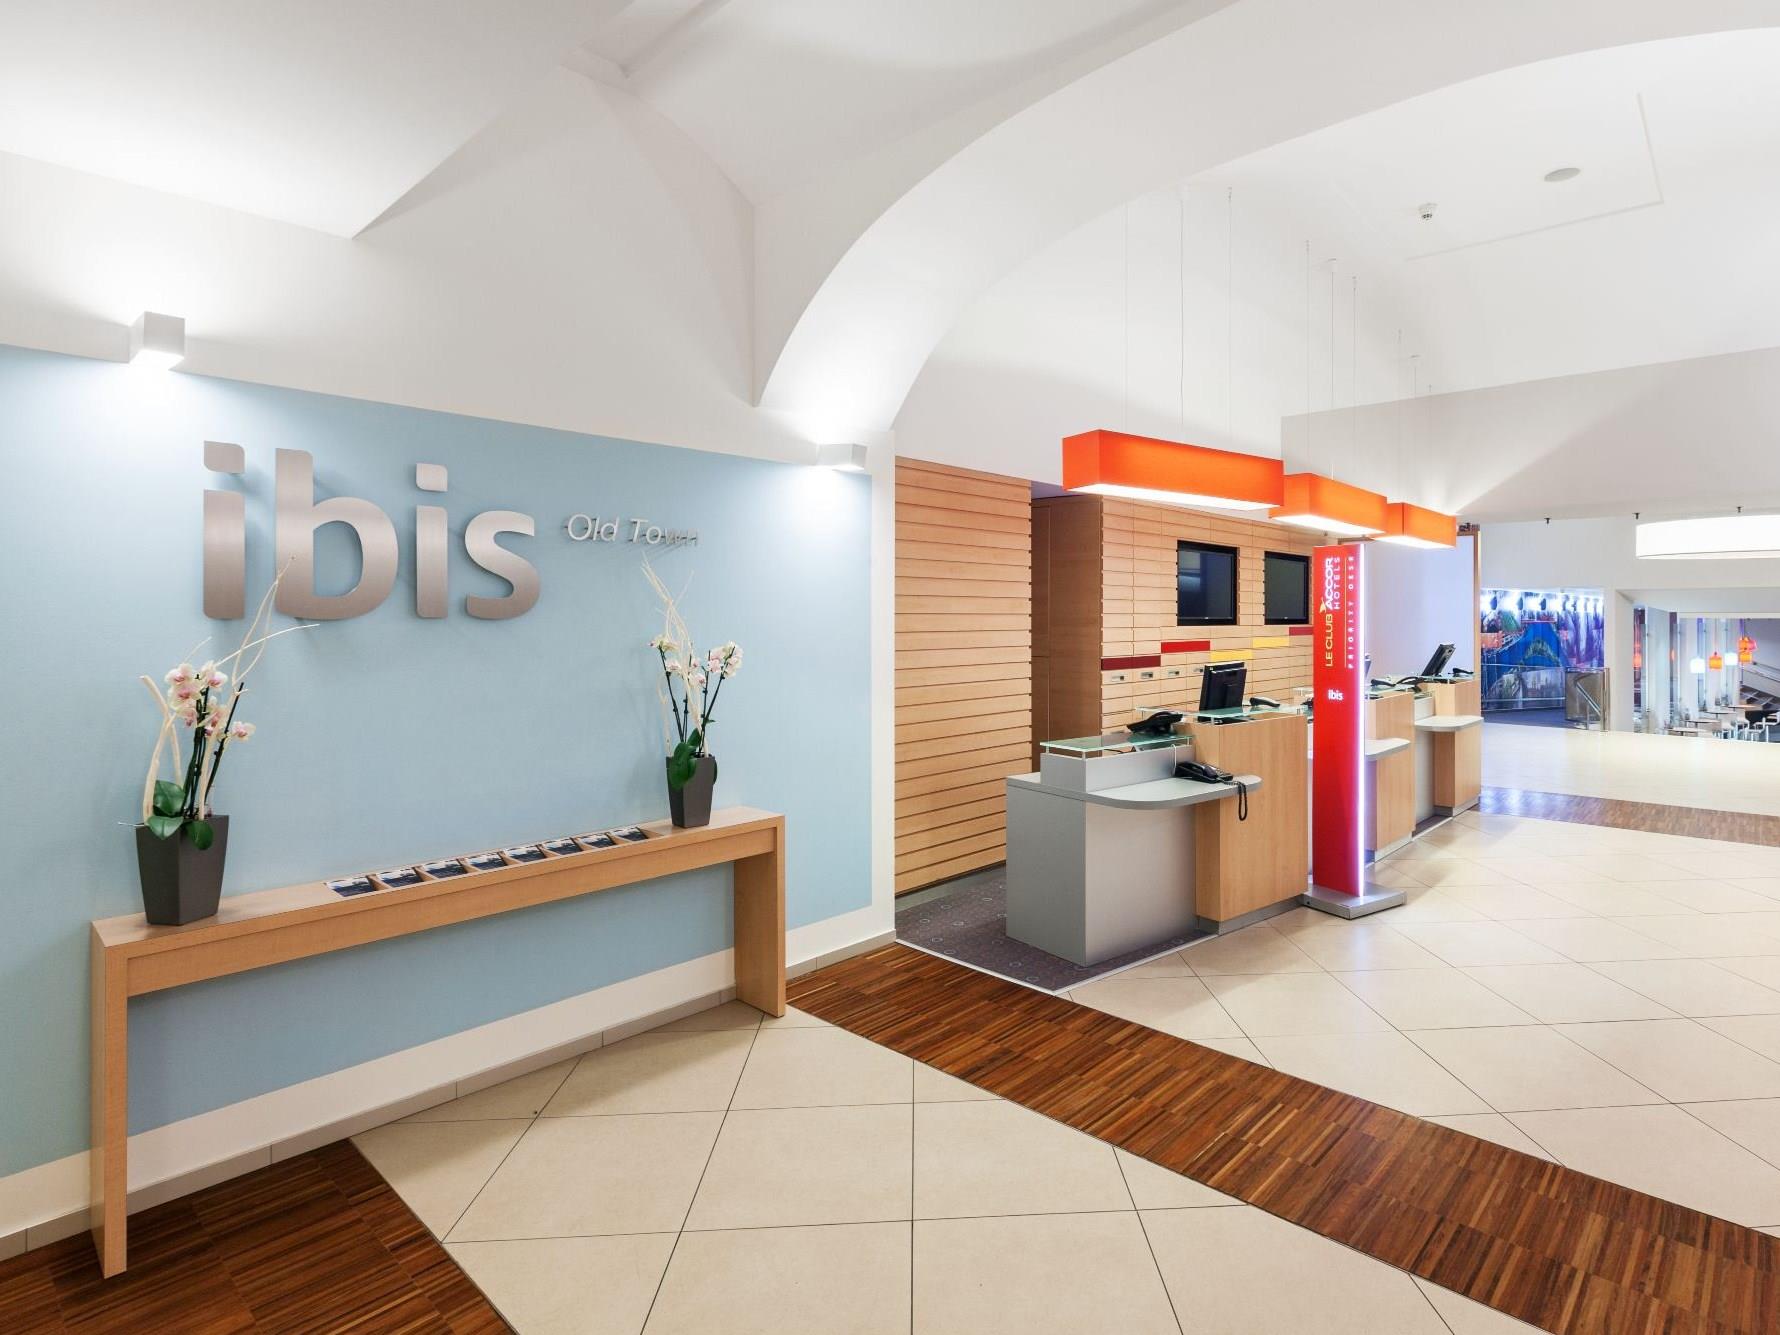 Ibis Praha Old Town Hotel Prague FAQ 2017, What facilities are there in Ibis Praha Old Town Hotel Prague 2017, What Languages Spoken are Supported in Ibis Praha Old Town Hotel Prague 2017, Which payment cards are accepted in Ibis Praha Old Town Hotel Prague , Prague Ibis Praha Old Town Hotel room facilities and services Q&A 2017, Prague Ibis Praha Old Town Hotel online booking services 2017, Prague Ibis Praha Old Town Hotel address 2017, Prague Ibis Praha Old Town Hotel telephone number 2017,Prague Ibis Praha Old Town Hotel map 2017, Prague Ibis Praha Old Town Hotel traffic guide 2017, how to go Prague Ibis Praha Old Town Hotel, Prague Ibis Praha Old Town Hotel booking online 2017, Prague Ibis Praha Old Town Hotel room types 2017.